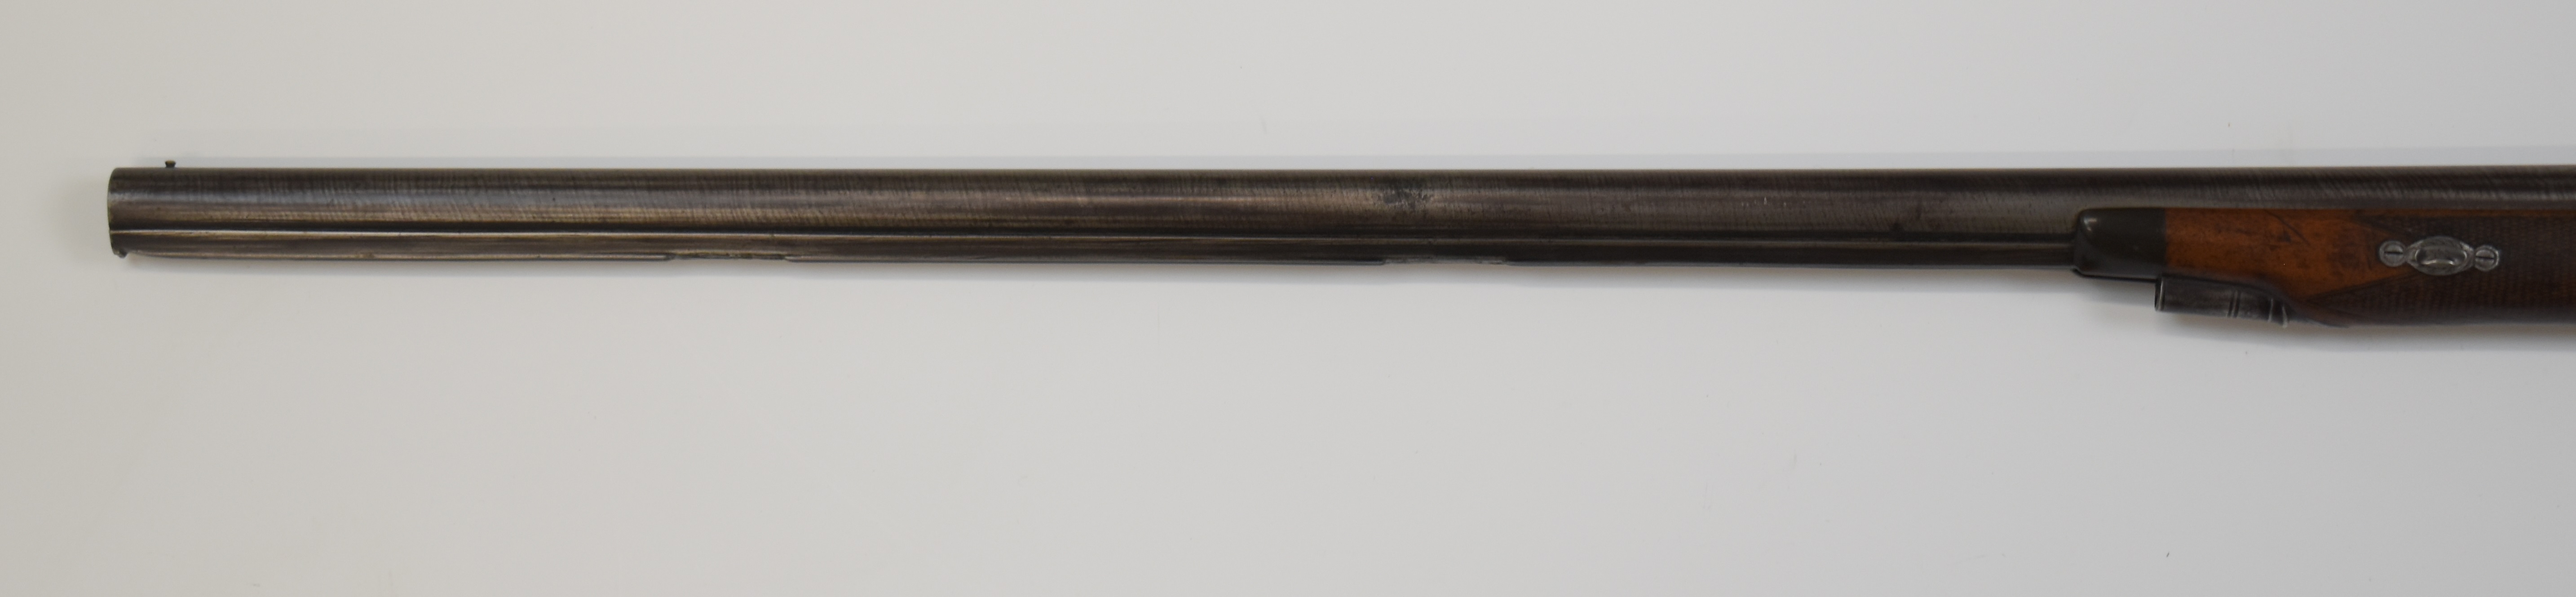 Indistinctly named 12 bore percussion hammer action muzzle loading sporting gun with engraved scenes - Image 10 of 10